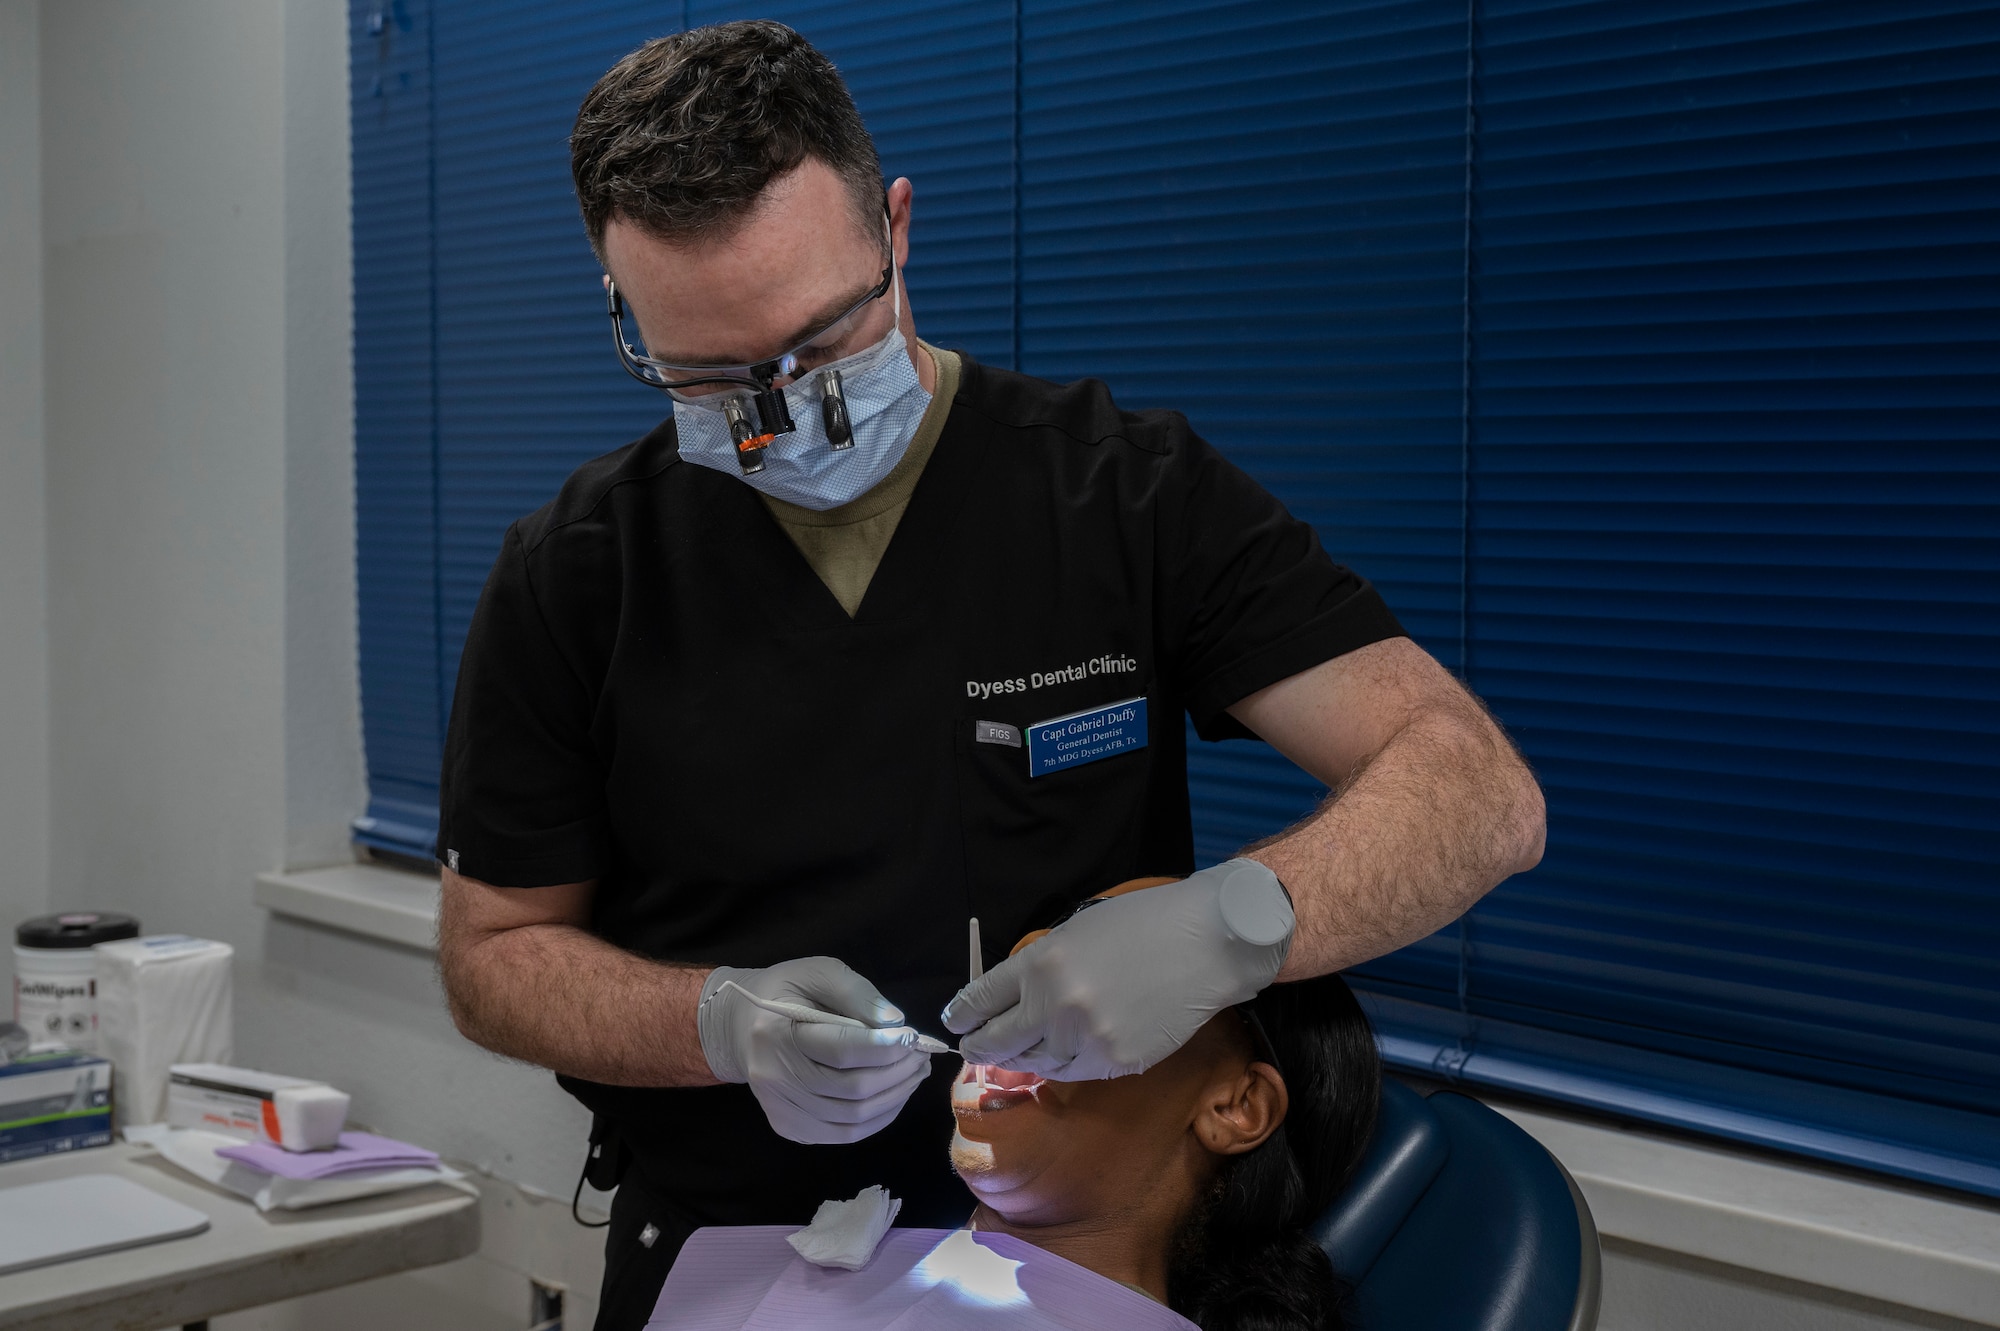 U.S. Air Force Capt. Gabriel Duffy, 7th Operational Medical Readiness Squadron dental flight dentist, performs a dental exam on Senior Airman Avonia Satchell, 317th Aircraft Maintenance Squadron electrical and environmental technician, in the Mobile Dental Clinic at Dyess Air Force Base, Texas, Nov. 30, 2023. The new Mobile Dental Clinic uses expeditionary mobilization equipment that most clinics do not have to bring their services to Airmen, offering them less time away from work, and dental care during times where clinics aren’t normally open. (U.S. Air Force photo by Airman 1st Class Alondra Cristobal Hernandez)